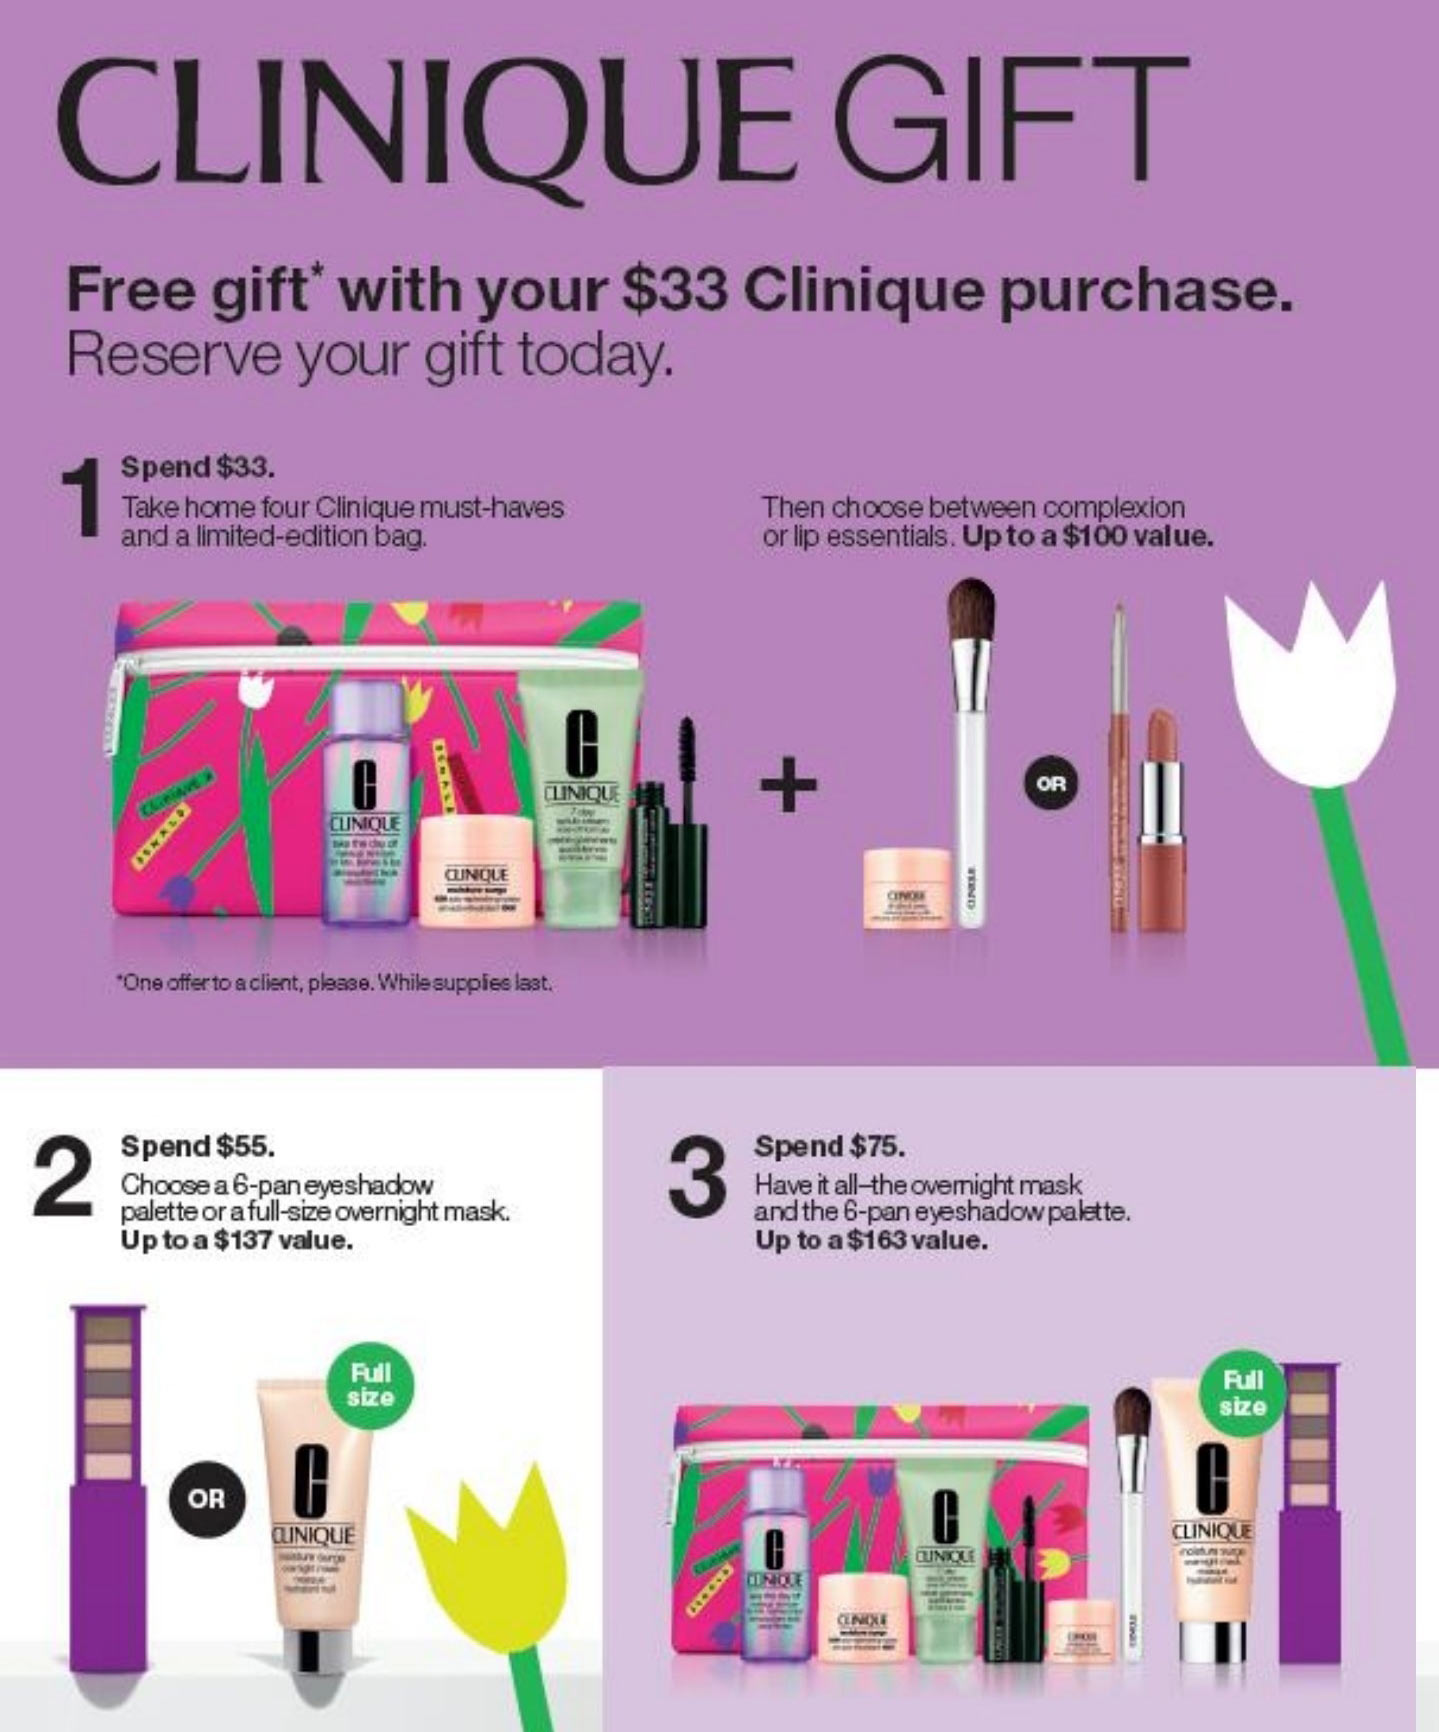 Clinique Gift Belk - starts February